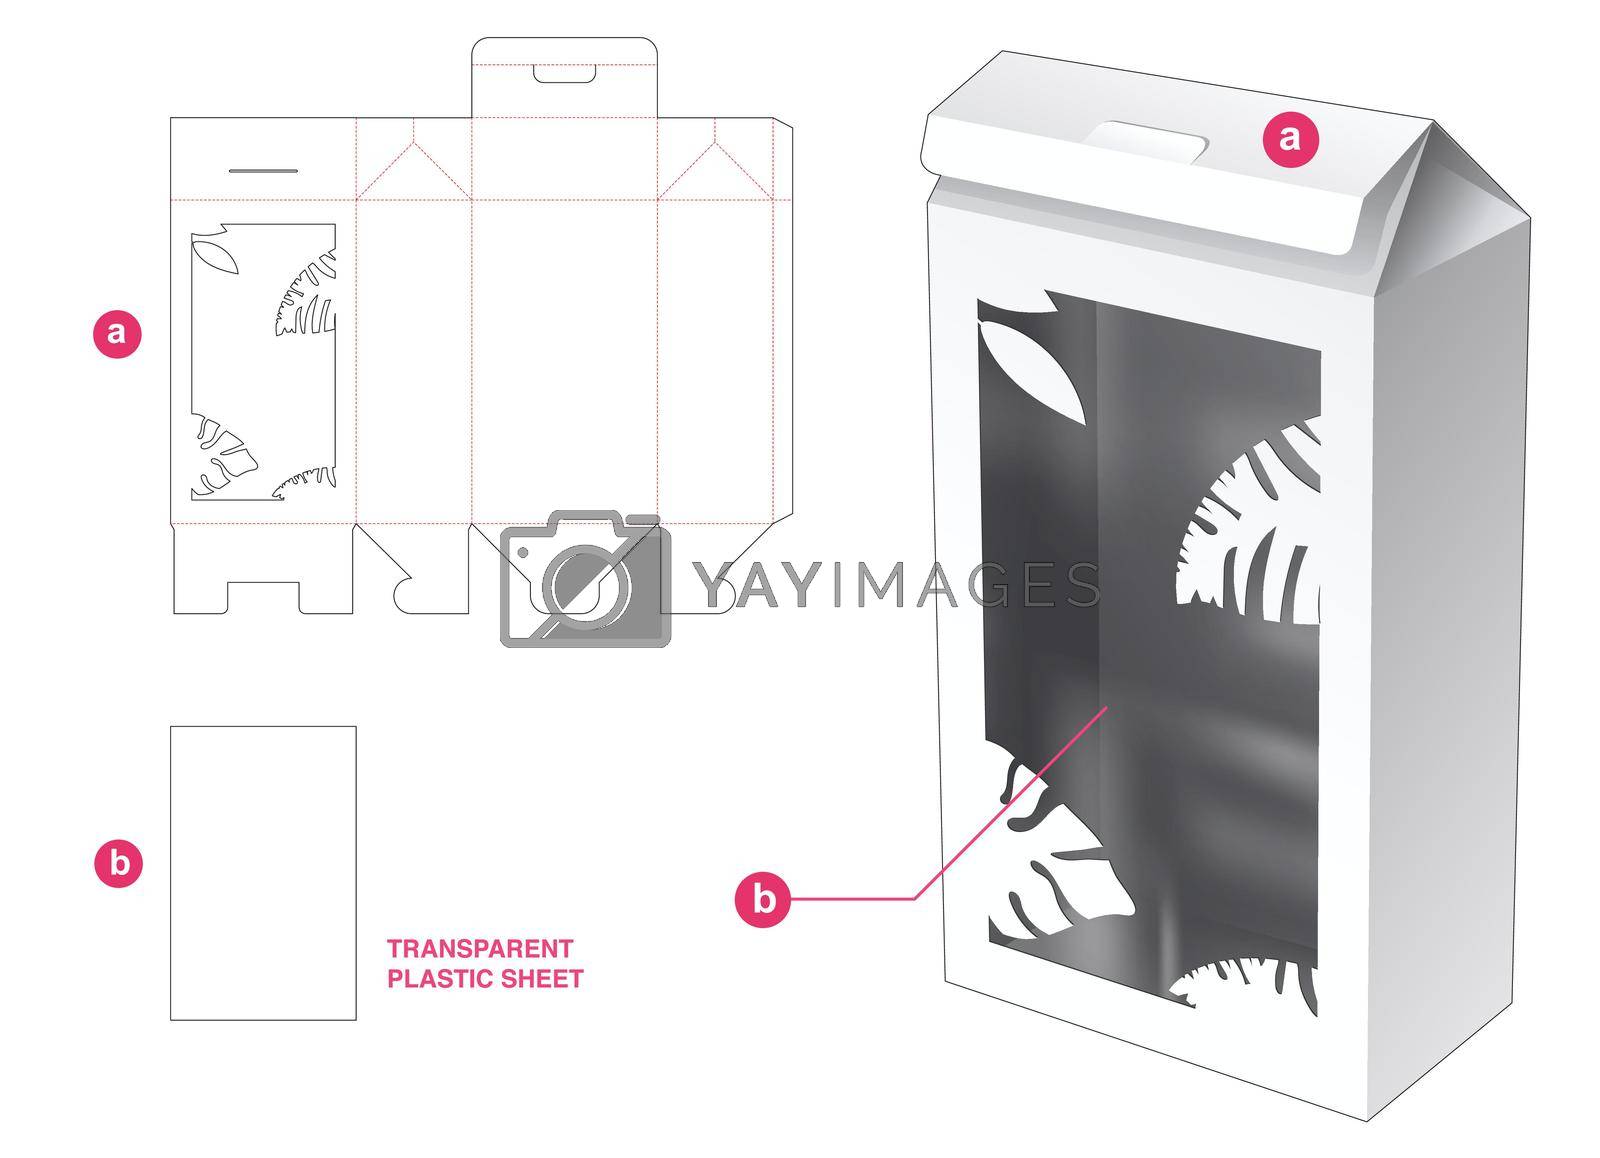 Royalty free image of tall house packaging and jungle window with transparent plastic sheet die cut template by valueinvestor